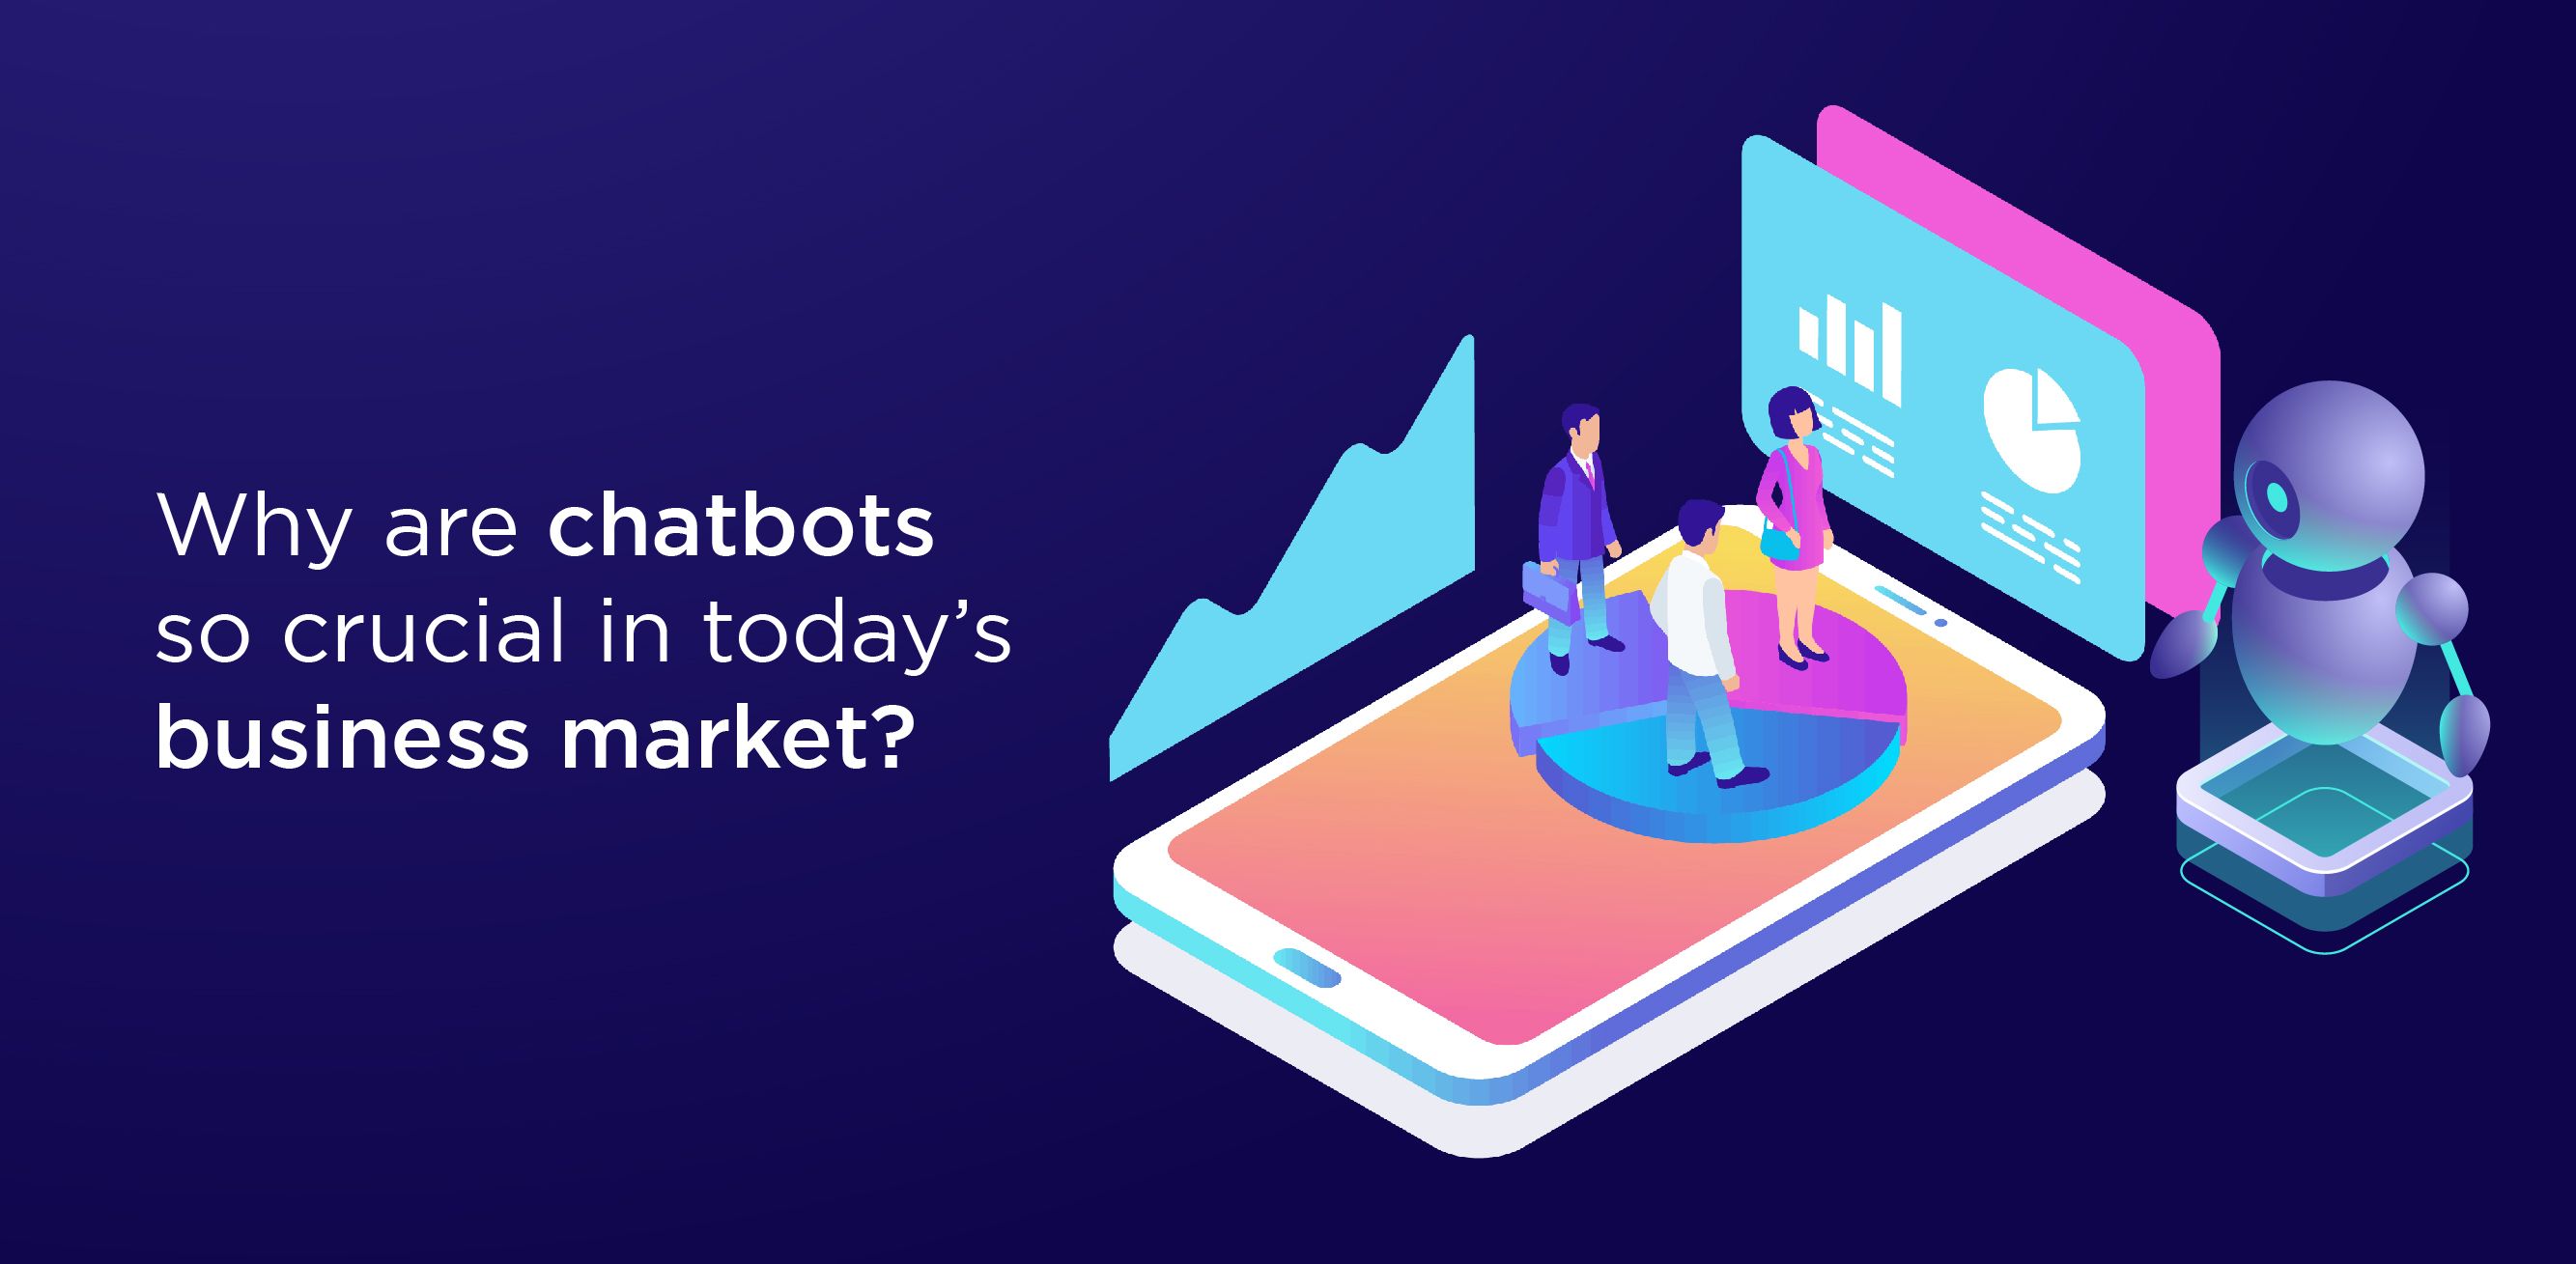 Why are chatbots so crucial in today’s business market